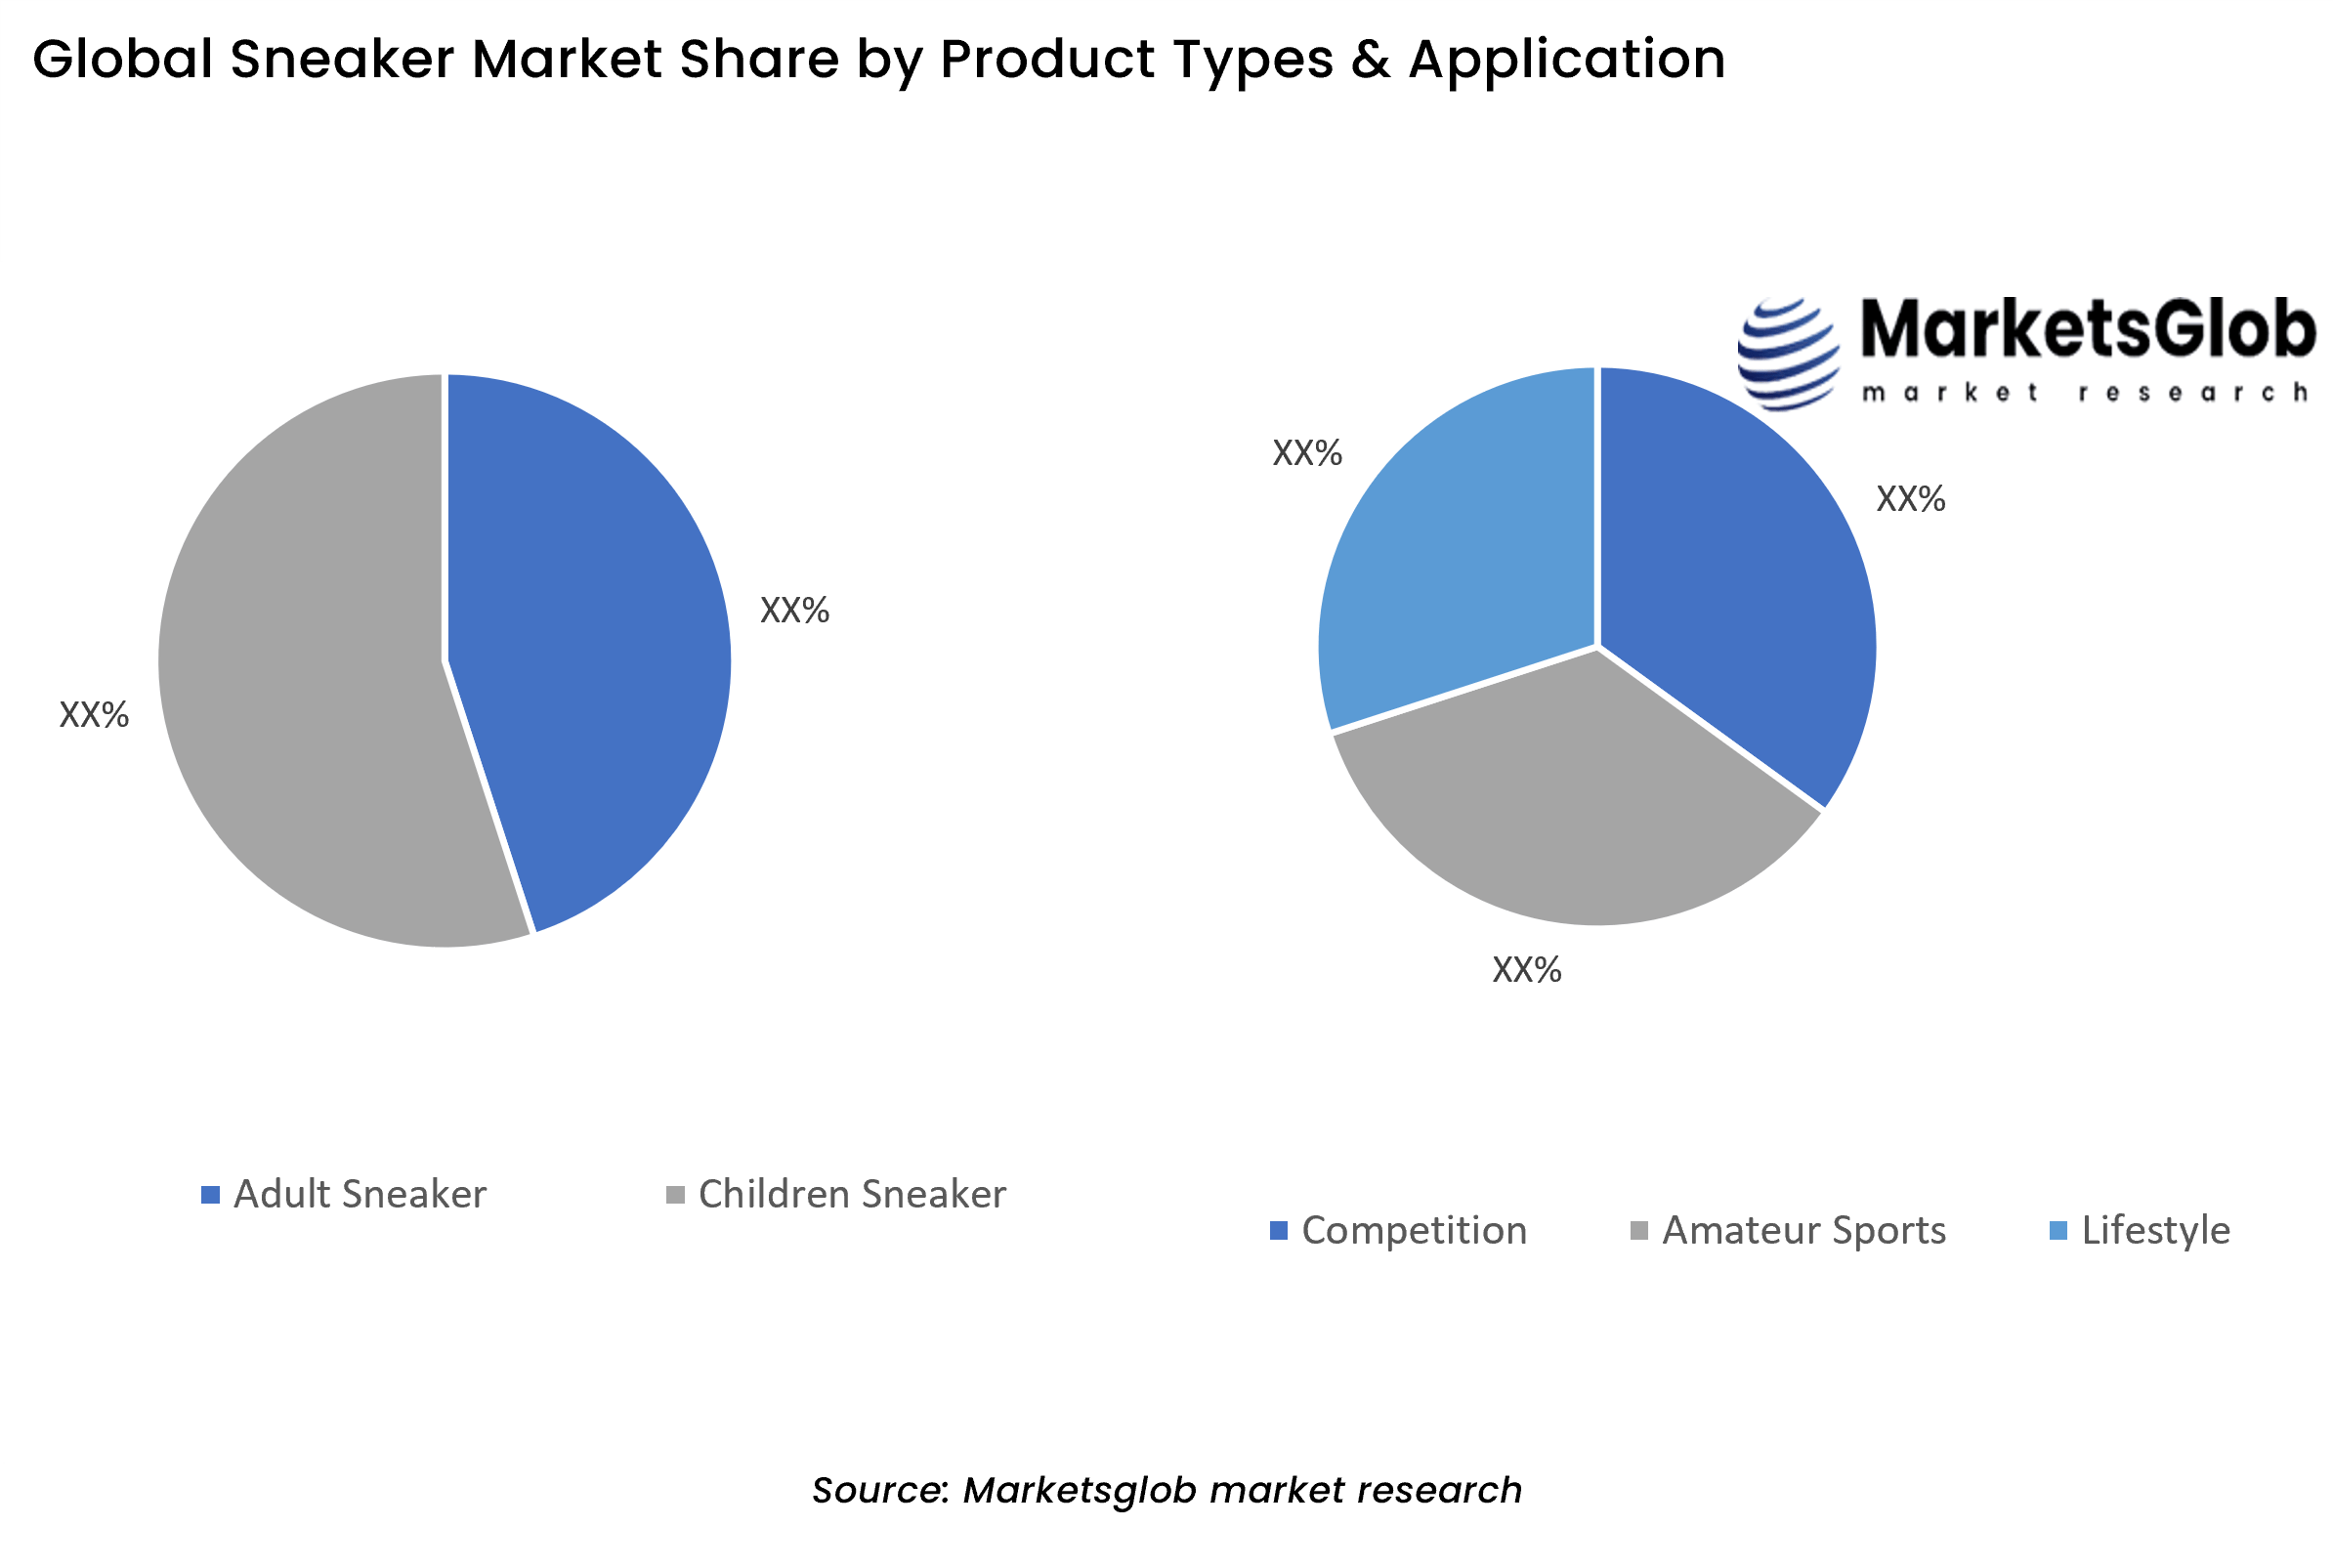 Sneaker Share by Product Types & Application